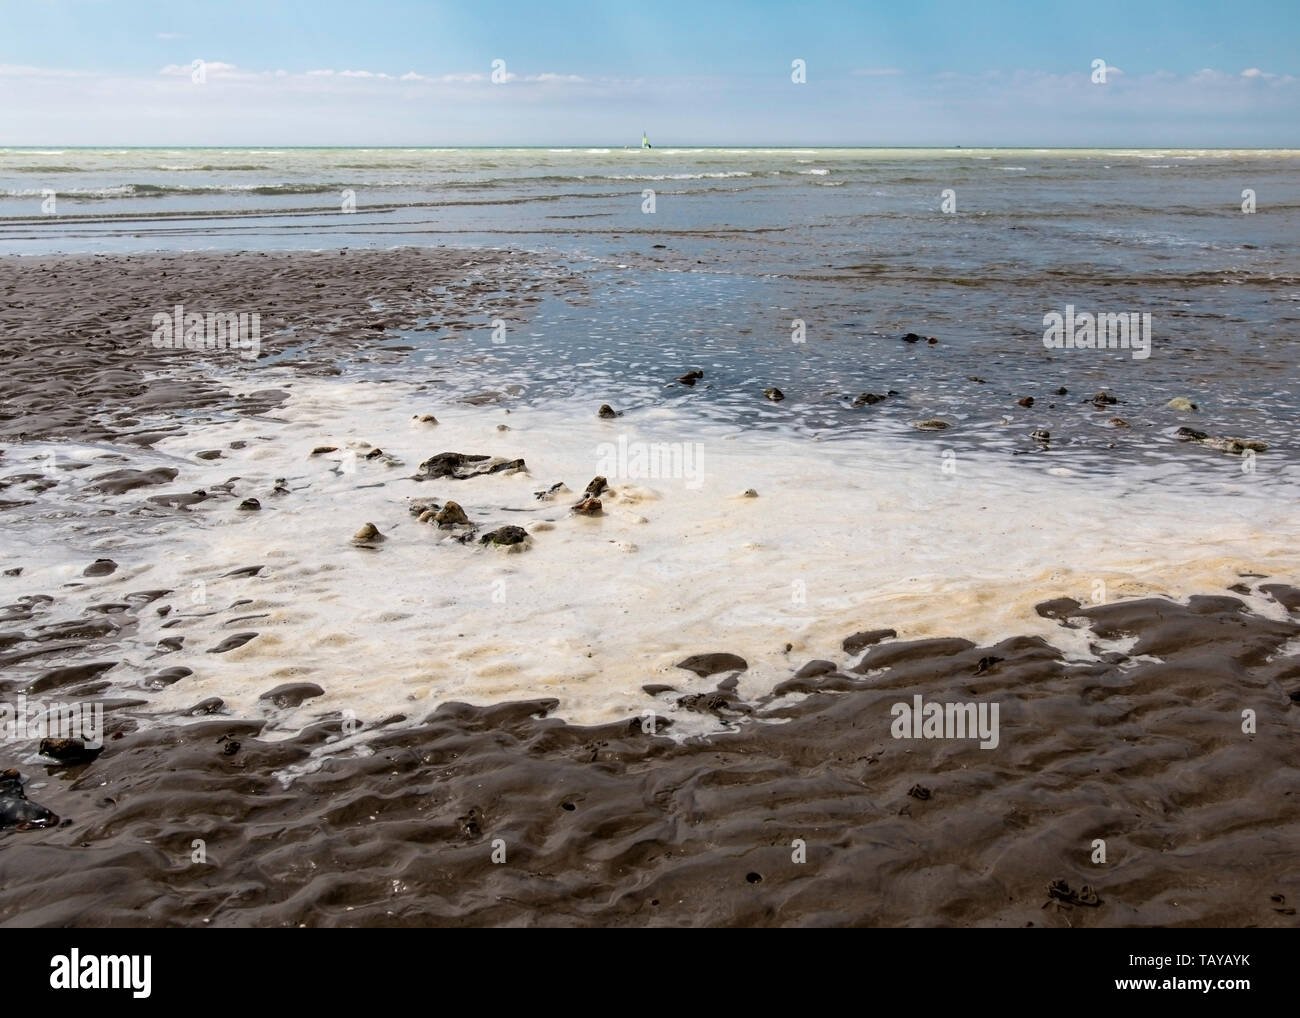 sea foam forming on the beach in Worthing, West Sussex, UK Stock Photo